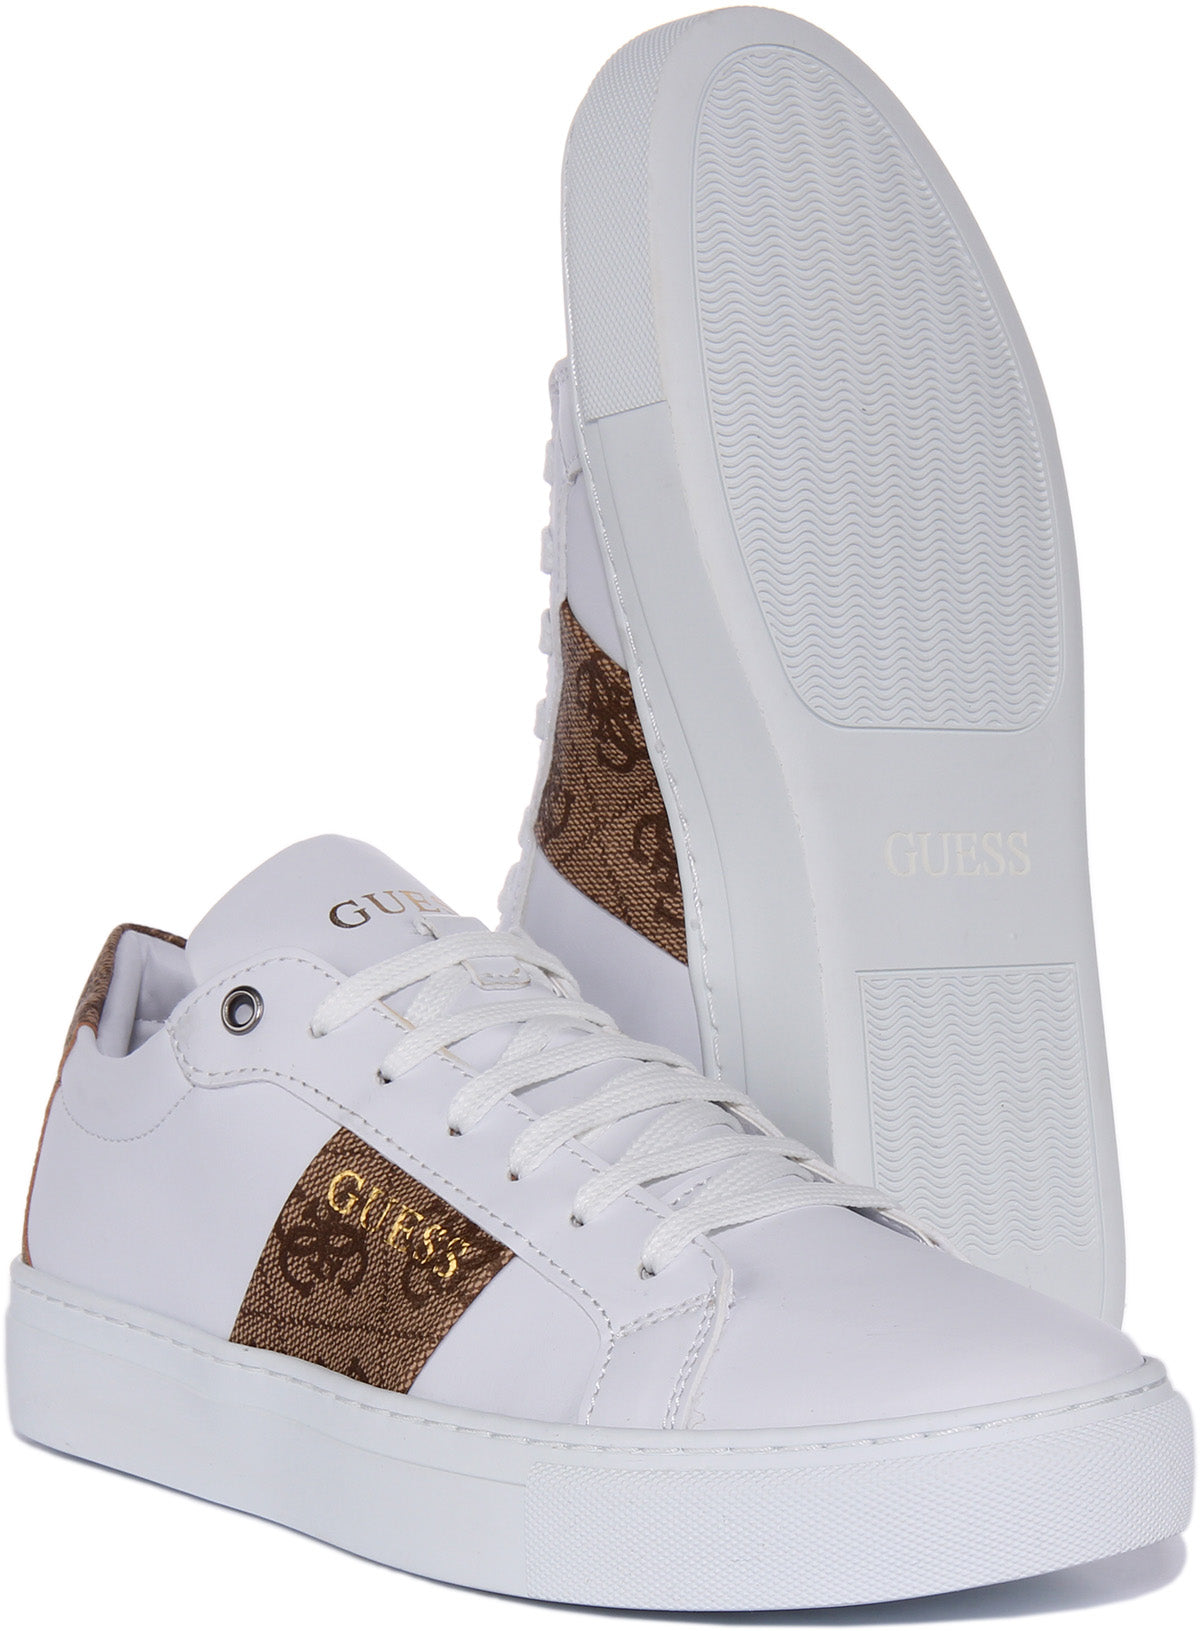 Baskets Guess Femme Beckie White